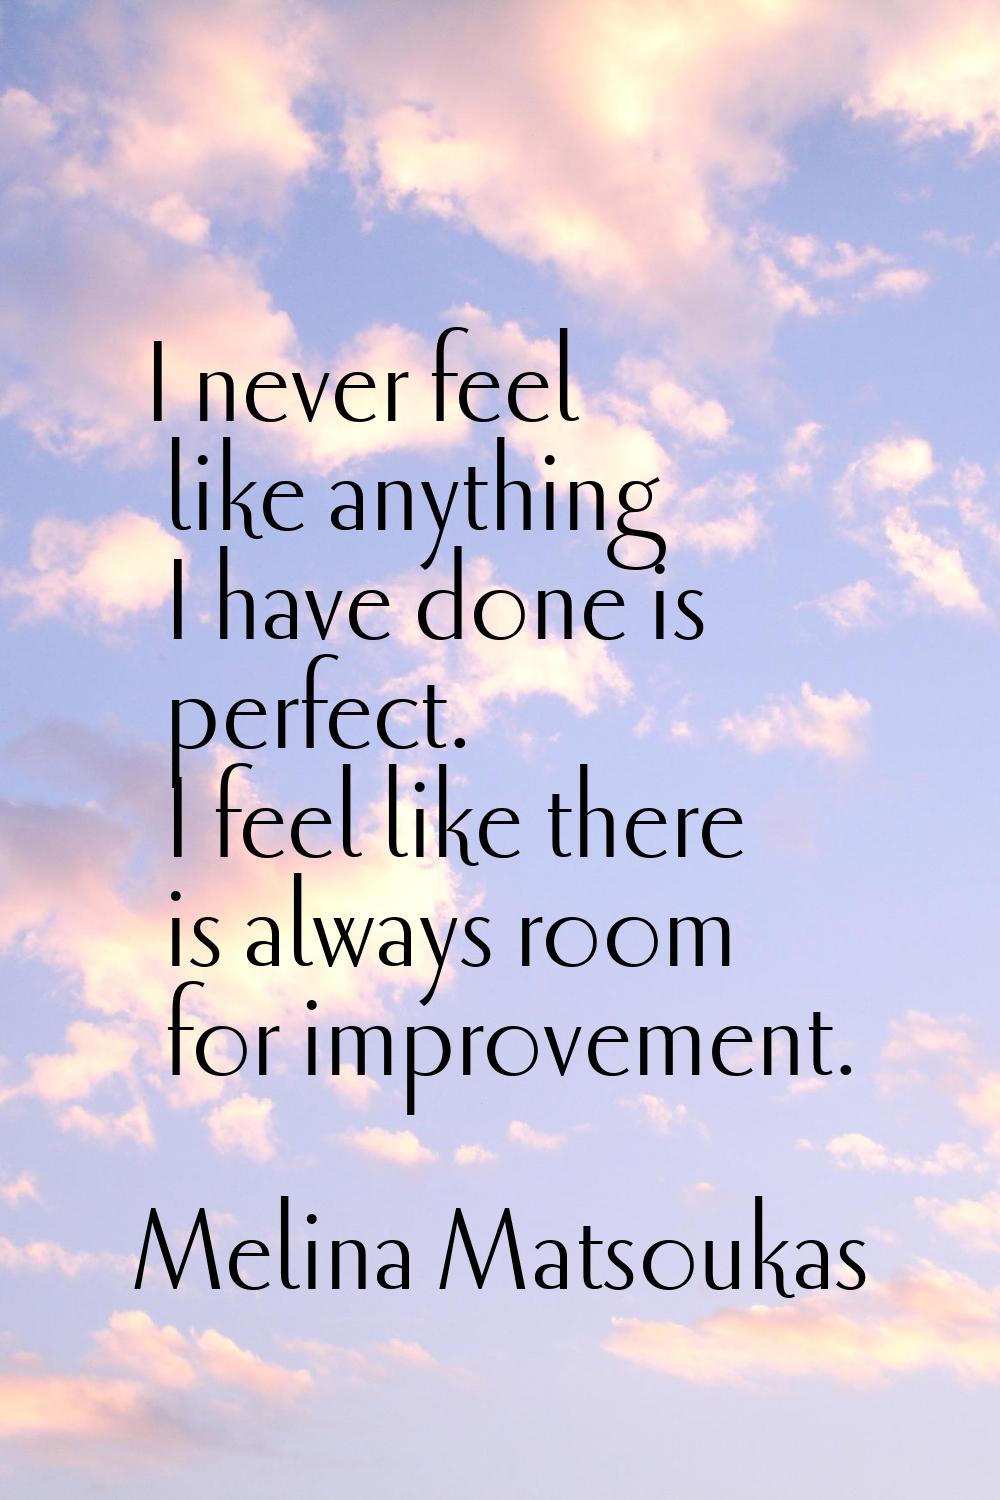 I never feel like anything I have done is perfect. I feel like there is always room for improvement